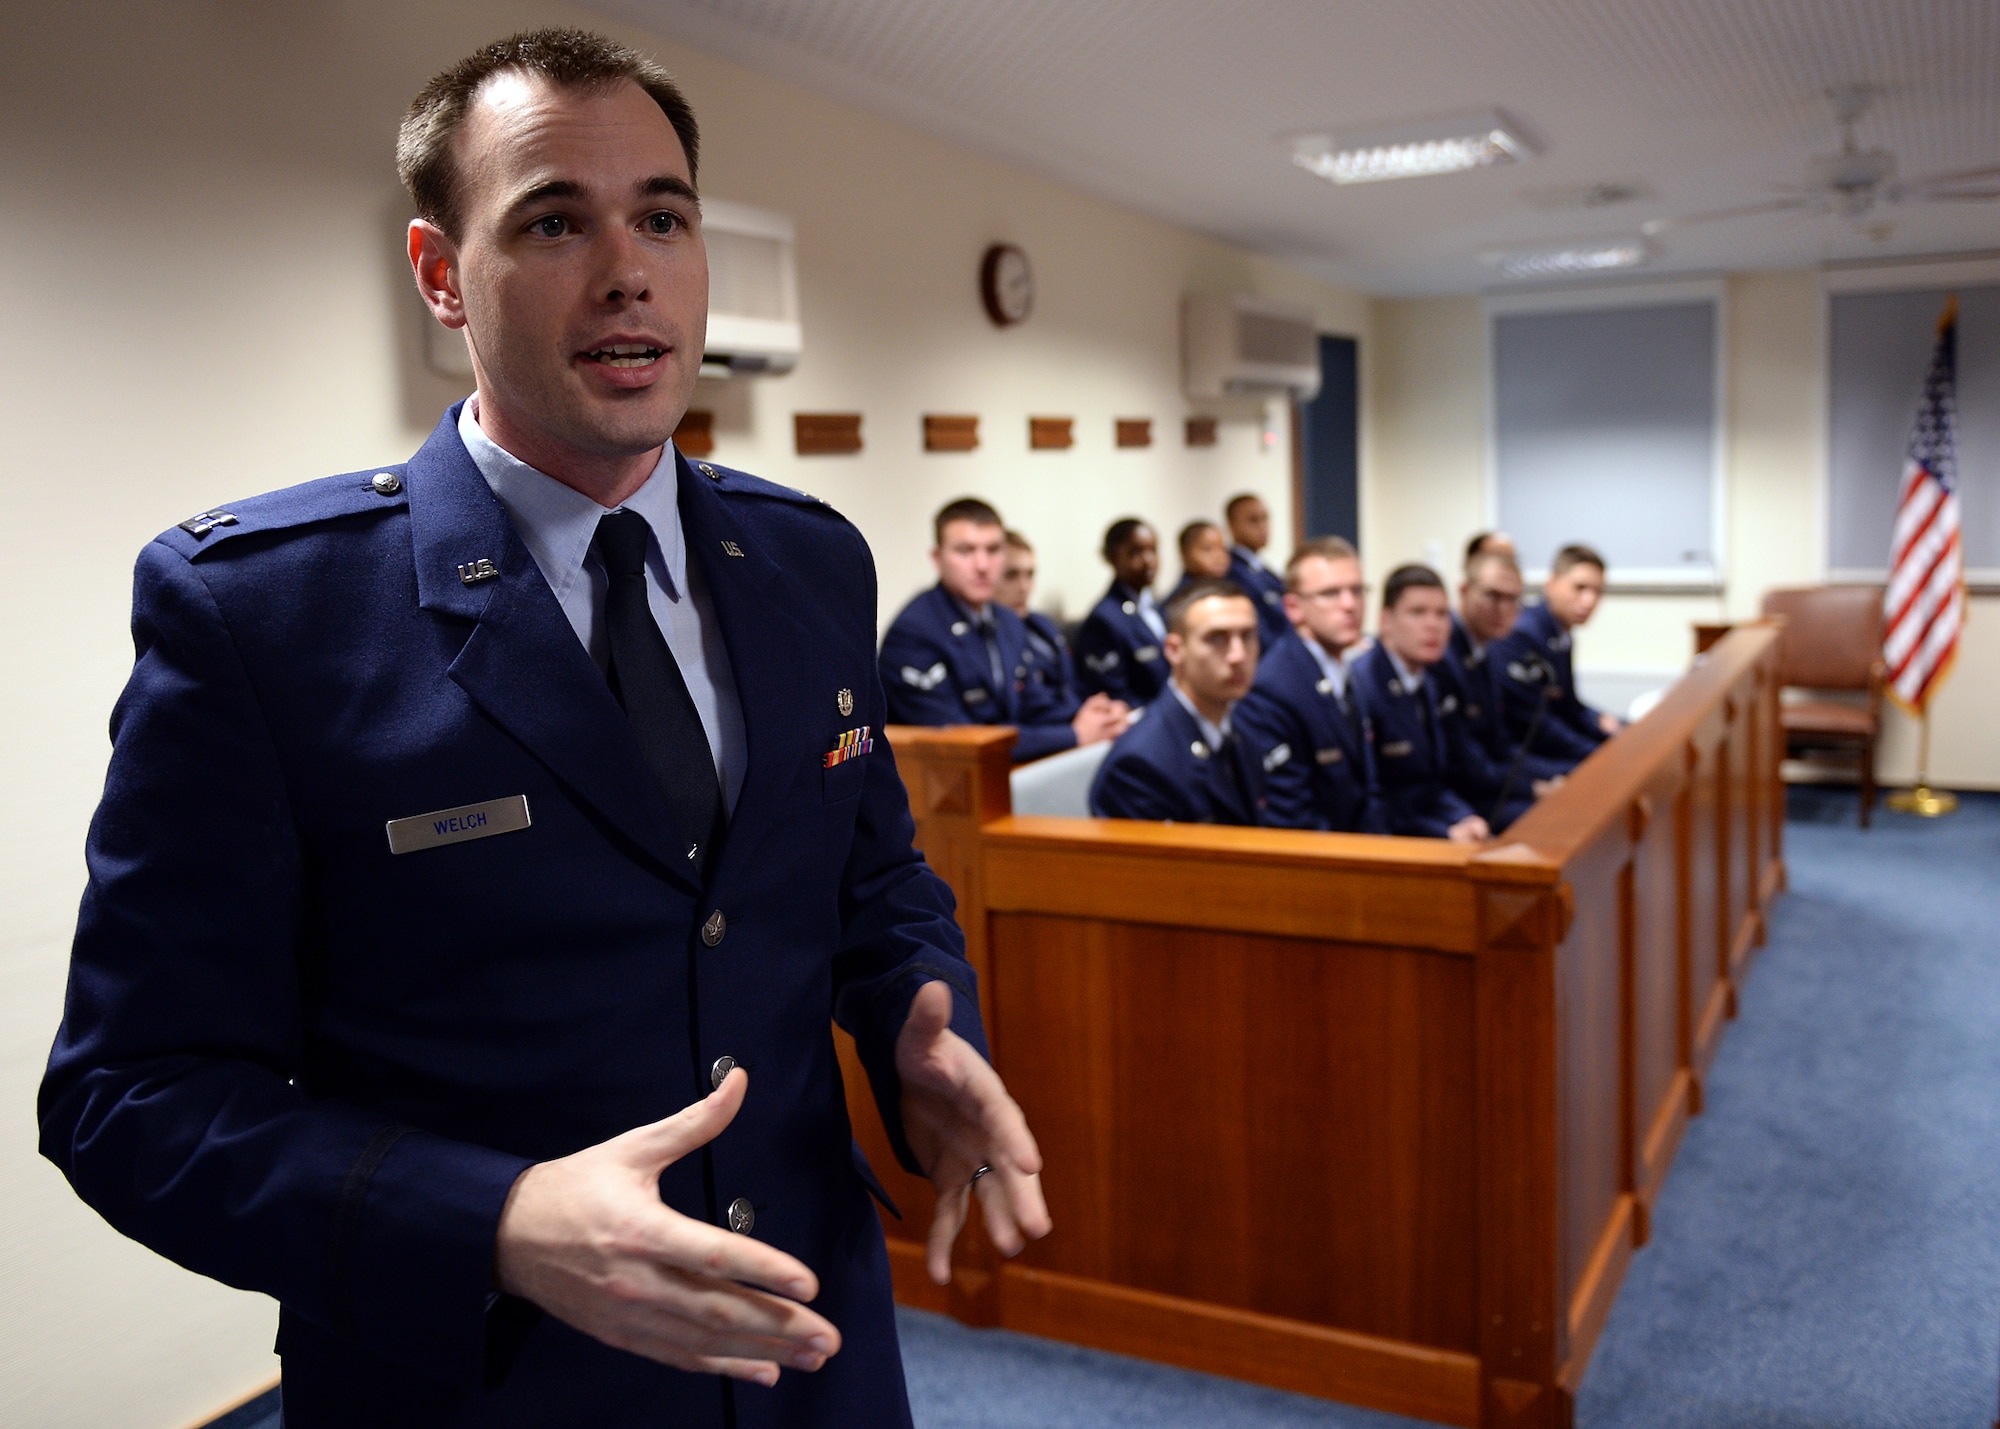 SPANGDAHLEM AIR BASE, Germany -- U.S. Air Force Capt. Samuel Welch, 52nd Fighter Wing Judge Advocate chief of military justice and from Fort Worth, Texas, explains the Air Force legal system while at the 52nd Fighter Wing legal office courtroom Oct. 24, 2013, to jury panel and audience members of Spangdahlem's interactive sexual assault prevention campaign, "Got Consent?" Many organizations throughout base collaborated in 2011 to create a process to educate new military members at Spangdahlem of the dangers of sexual assault. (U.S. Air Force photo by Staff Sgt. Daryl Knee/Released)